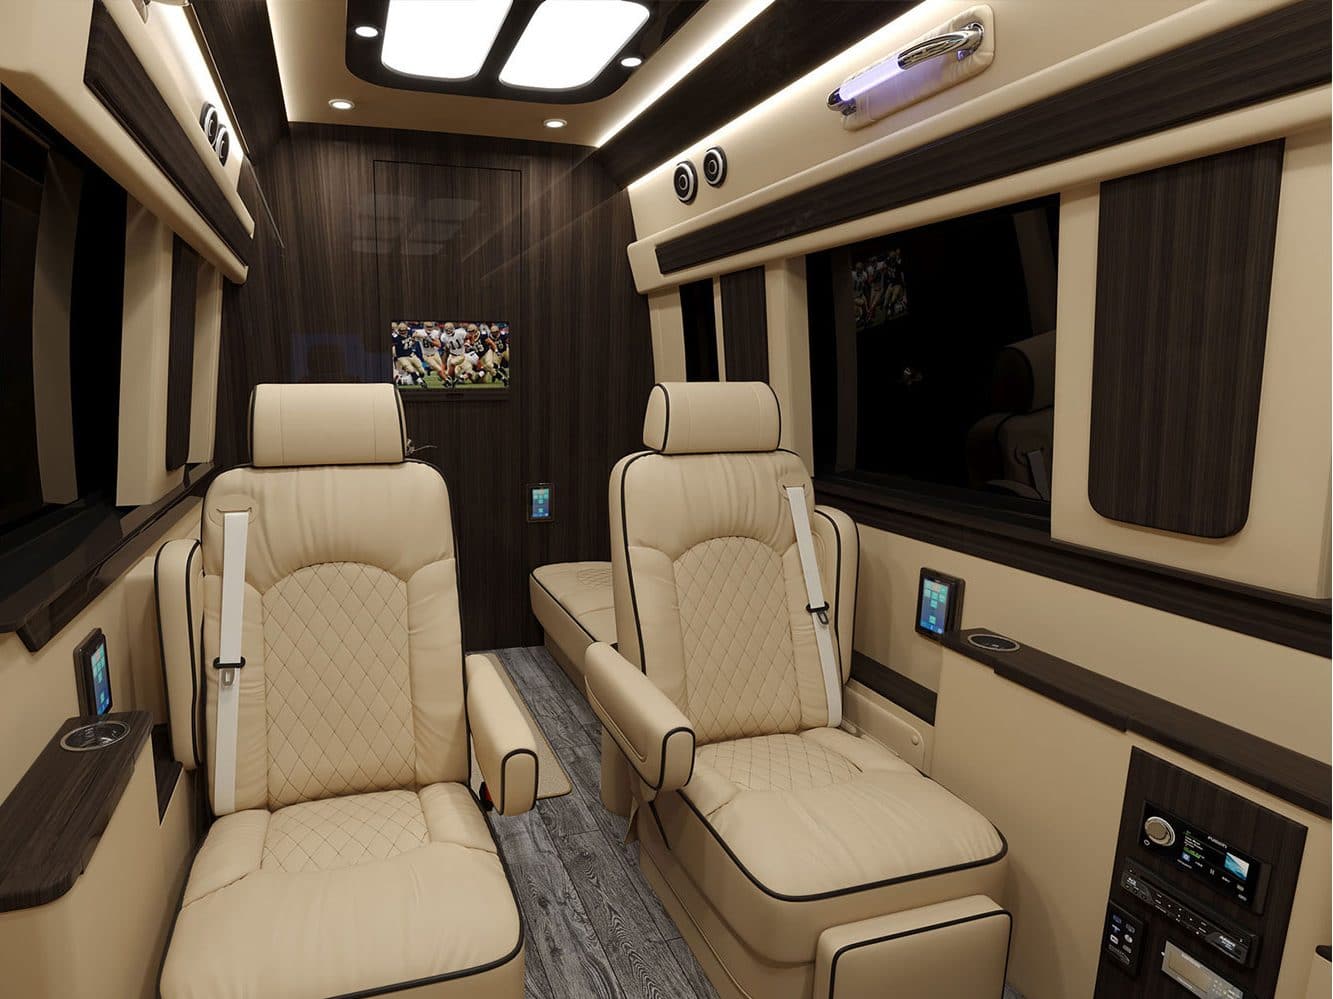 ultimate coach - luxurious interior packed with amenities